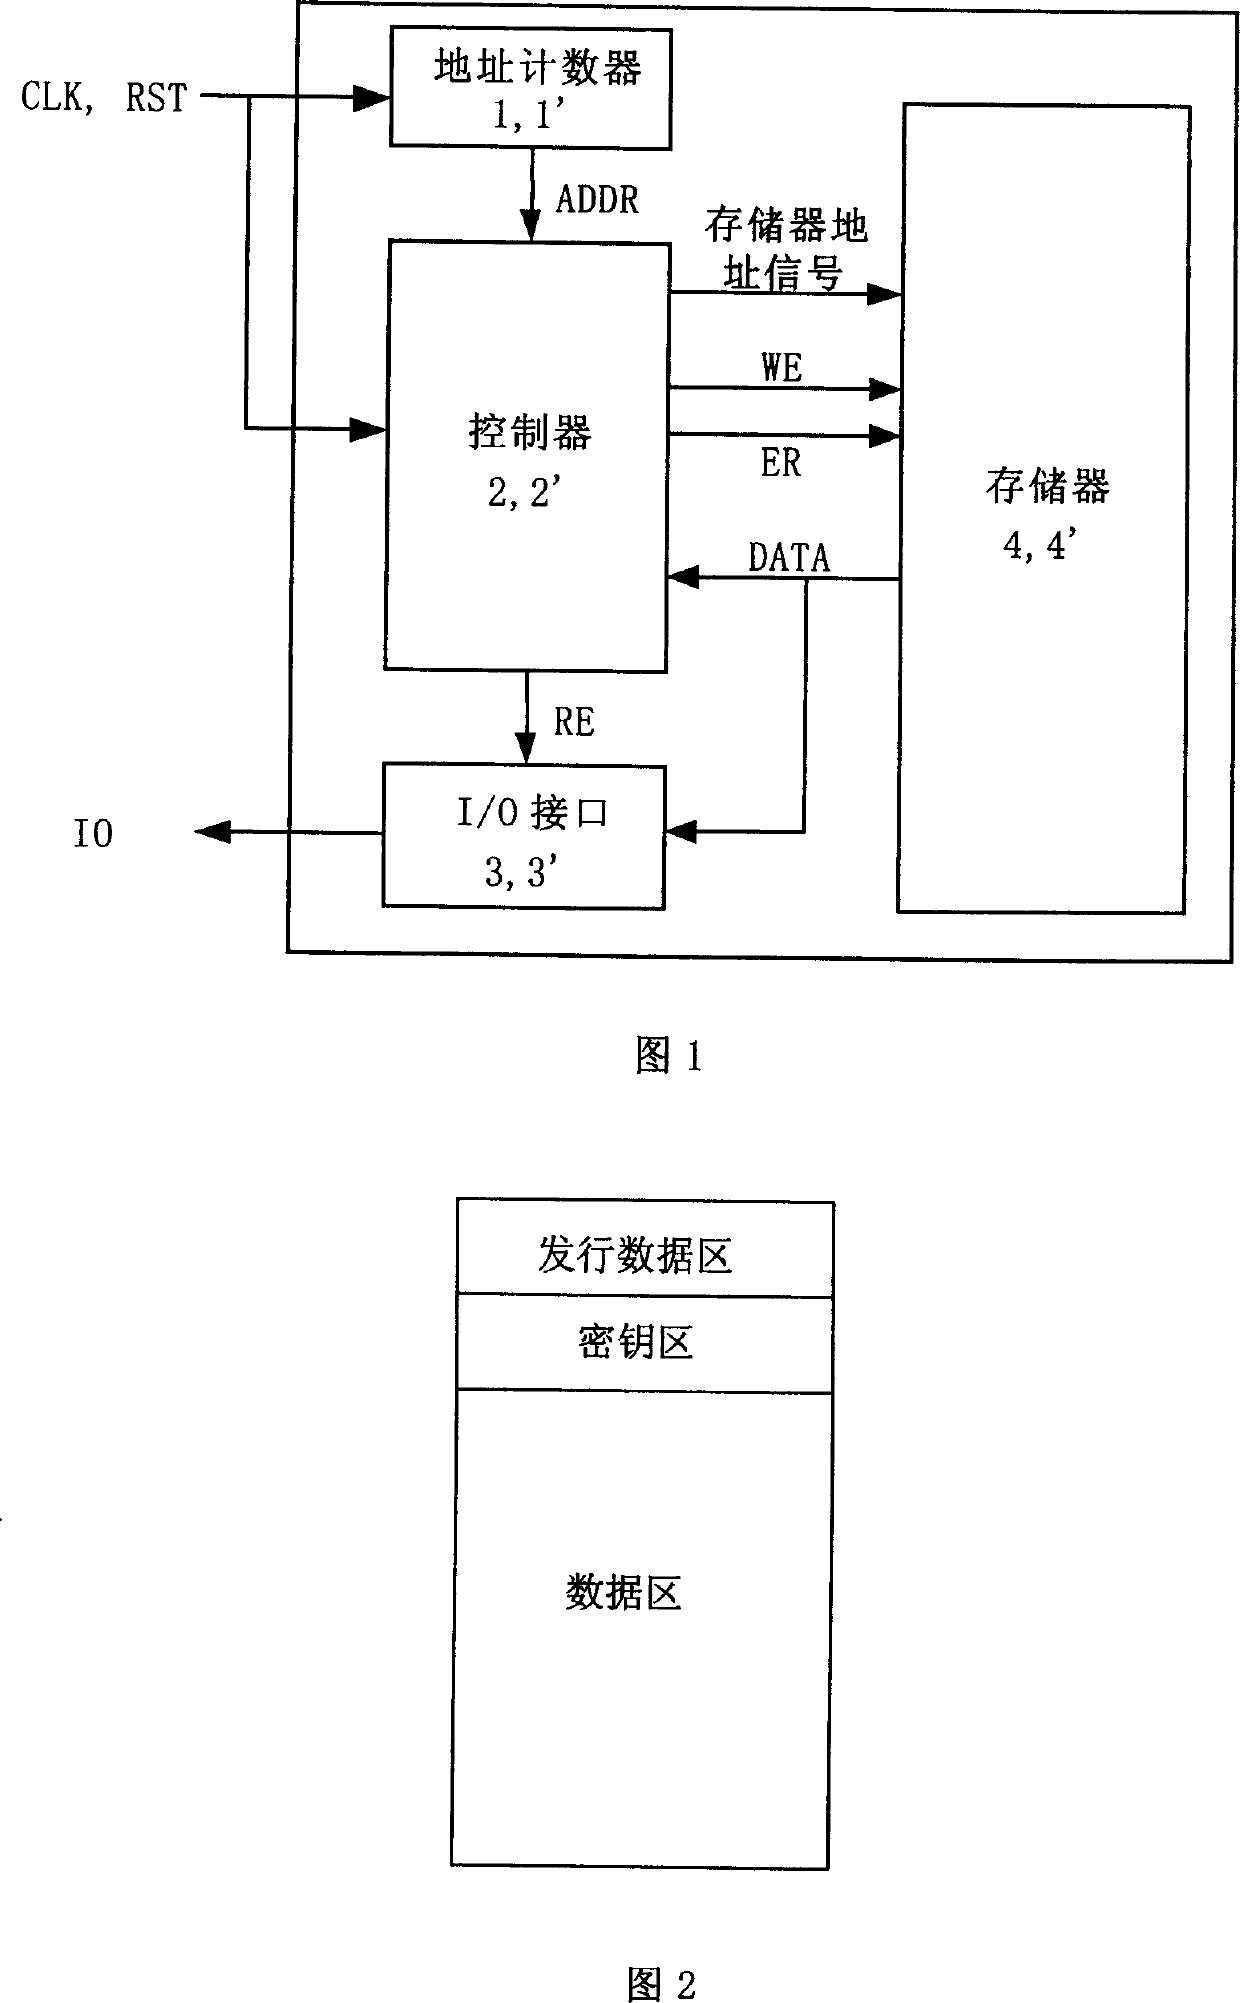 Non-CPU integrated circuit card for optimizing storage logic partition structure